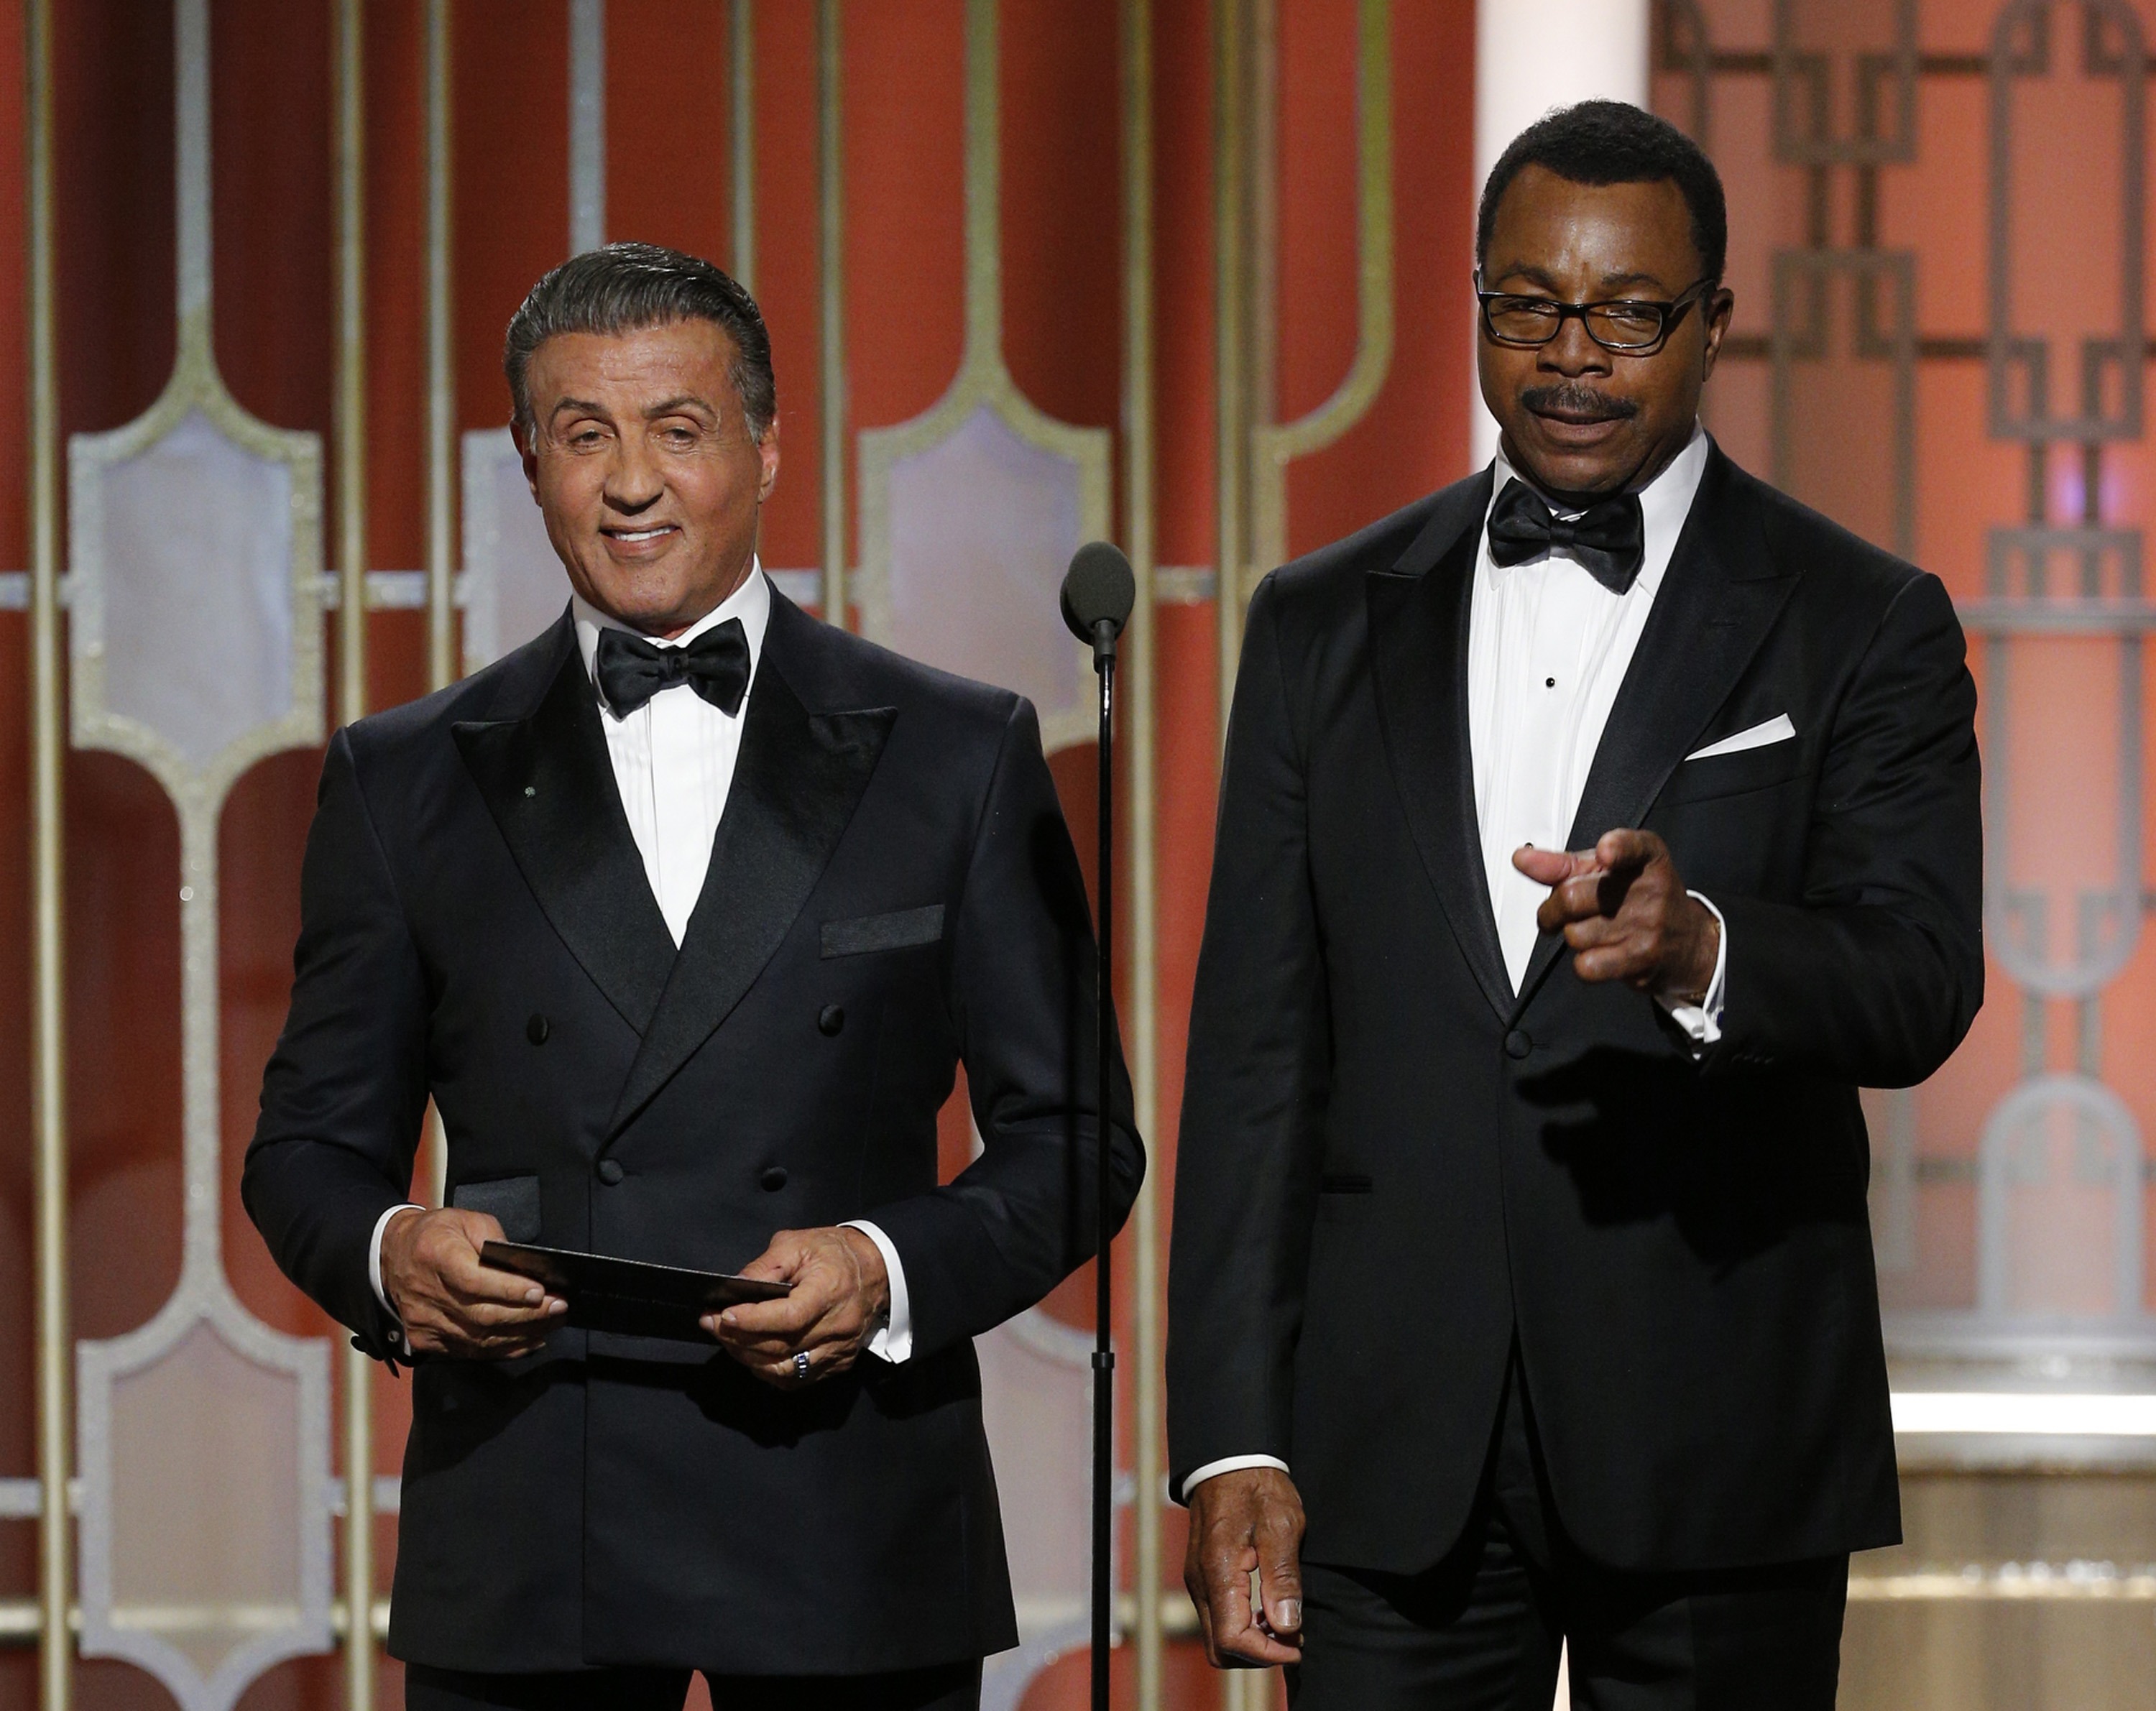 Weathers, pictured alongside Rocky star Sylvester Stallone, was best known for his role in the Rocky films